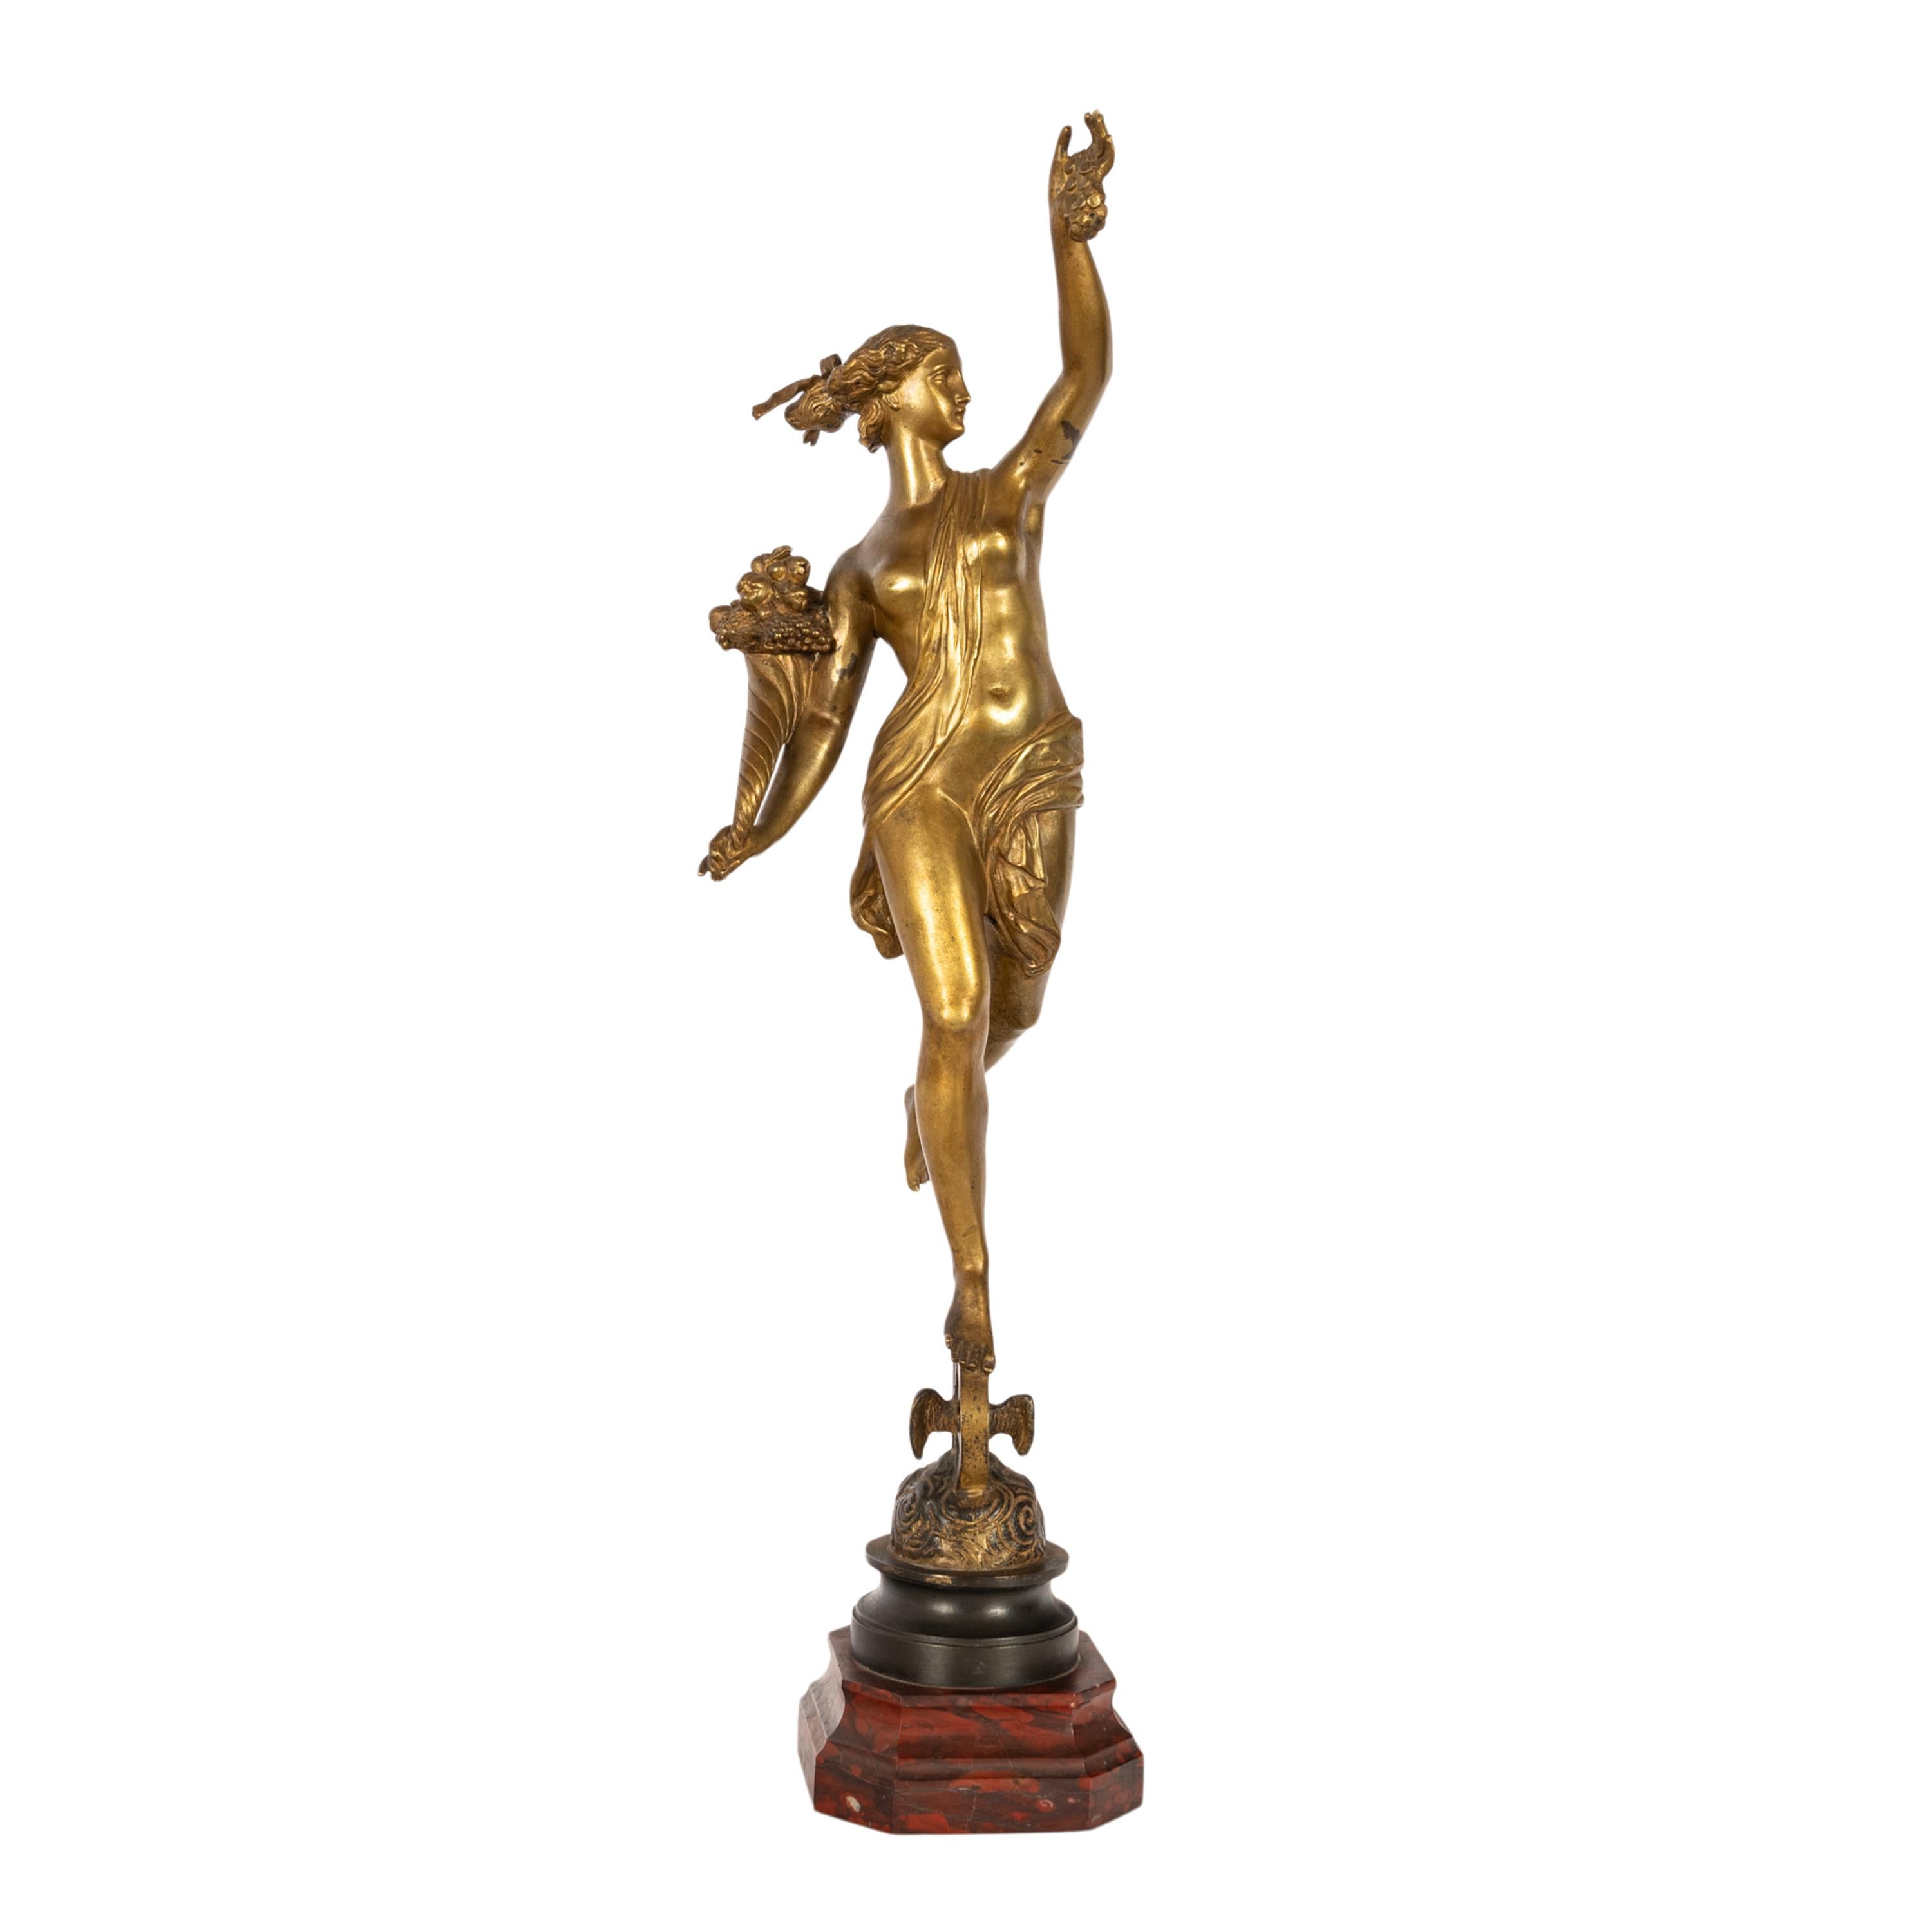 Louis Guillaume Fulconis  Figurative Sculpture - Antique French Gilt Bronze Marble Statue Sculpture of Fortuna Louis G Fulconis 